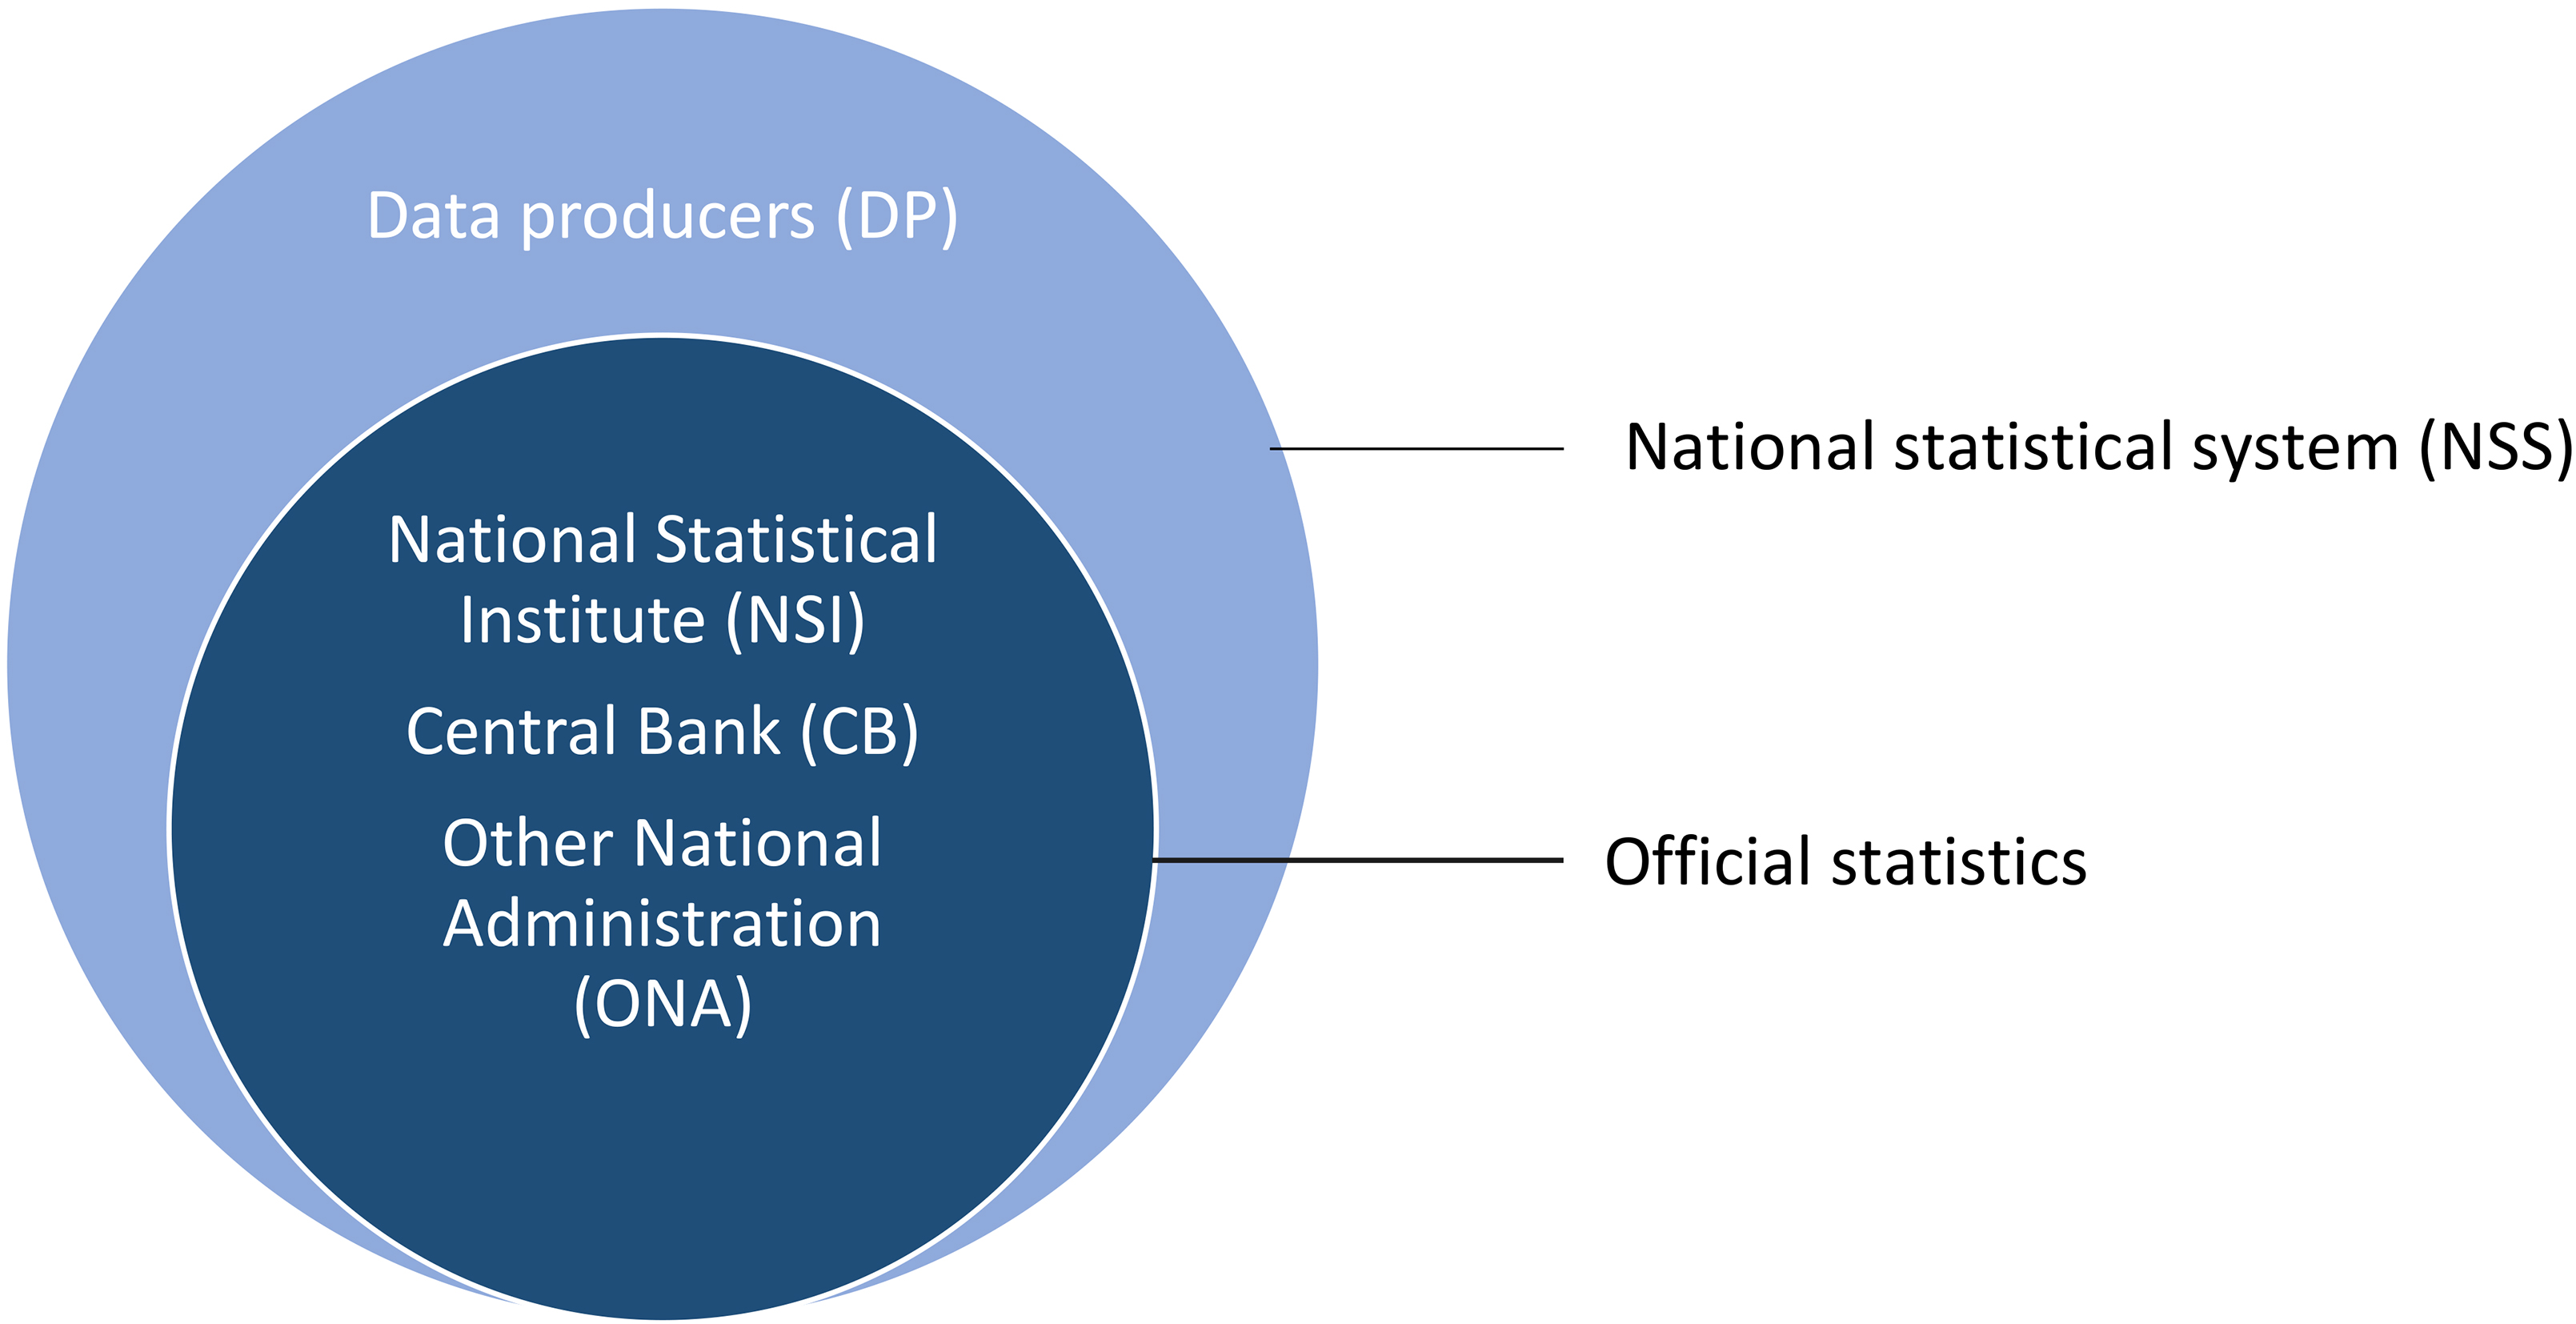 Boundaries of the National Statistical System (NSS) and Official Statistics.